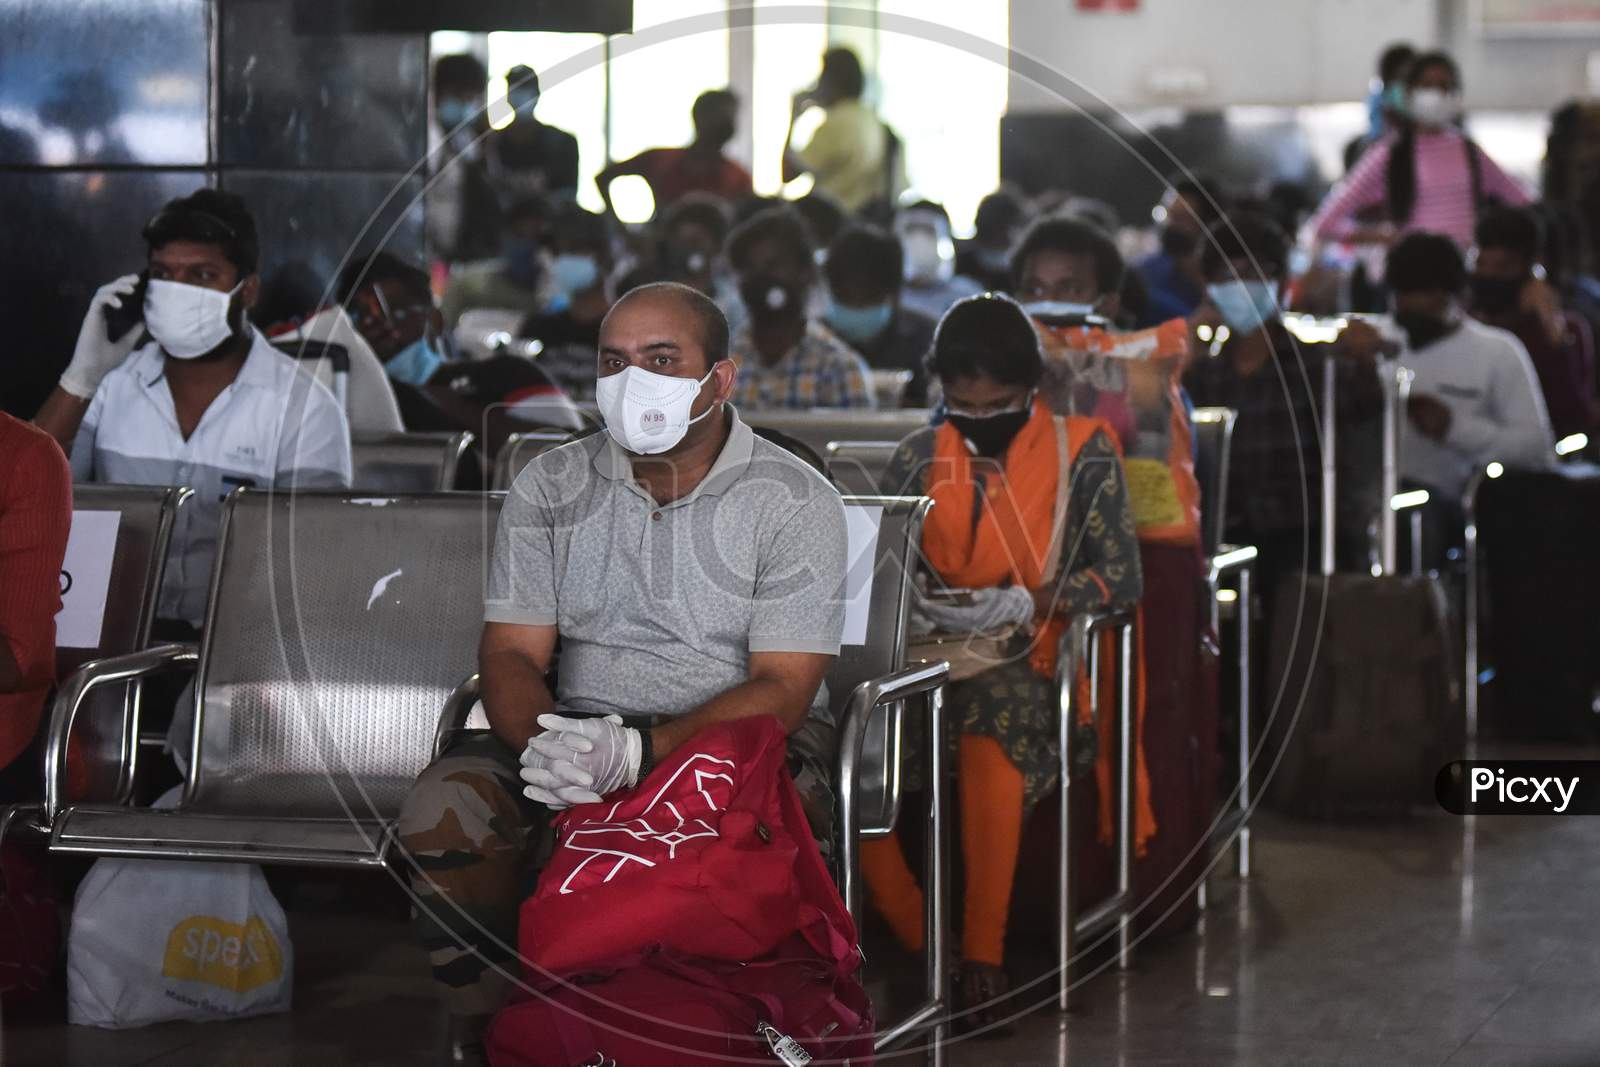 Passengers Wait For Thermal Scanning On Their Arrival At Vijayawada Railway Station On A Special Train From New Delhi, During The Nationwide Lockdown Amid Coronavirus Pandemic In Vijayawada.